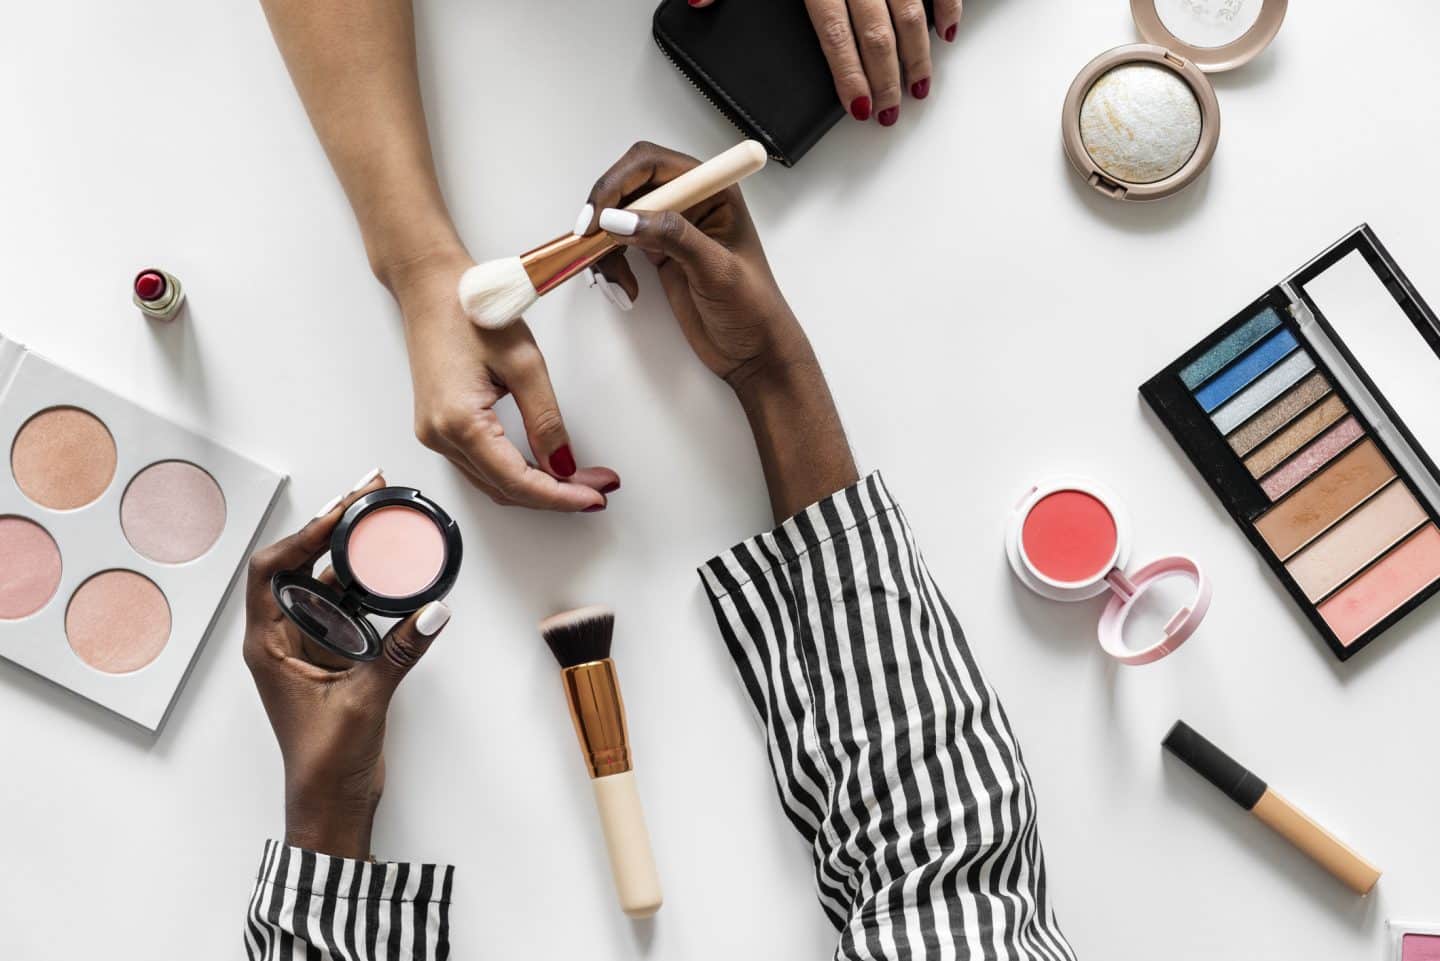 Inside the Perfect Personalization of the Ulta App